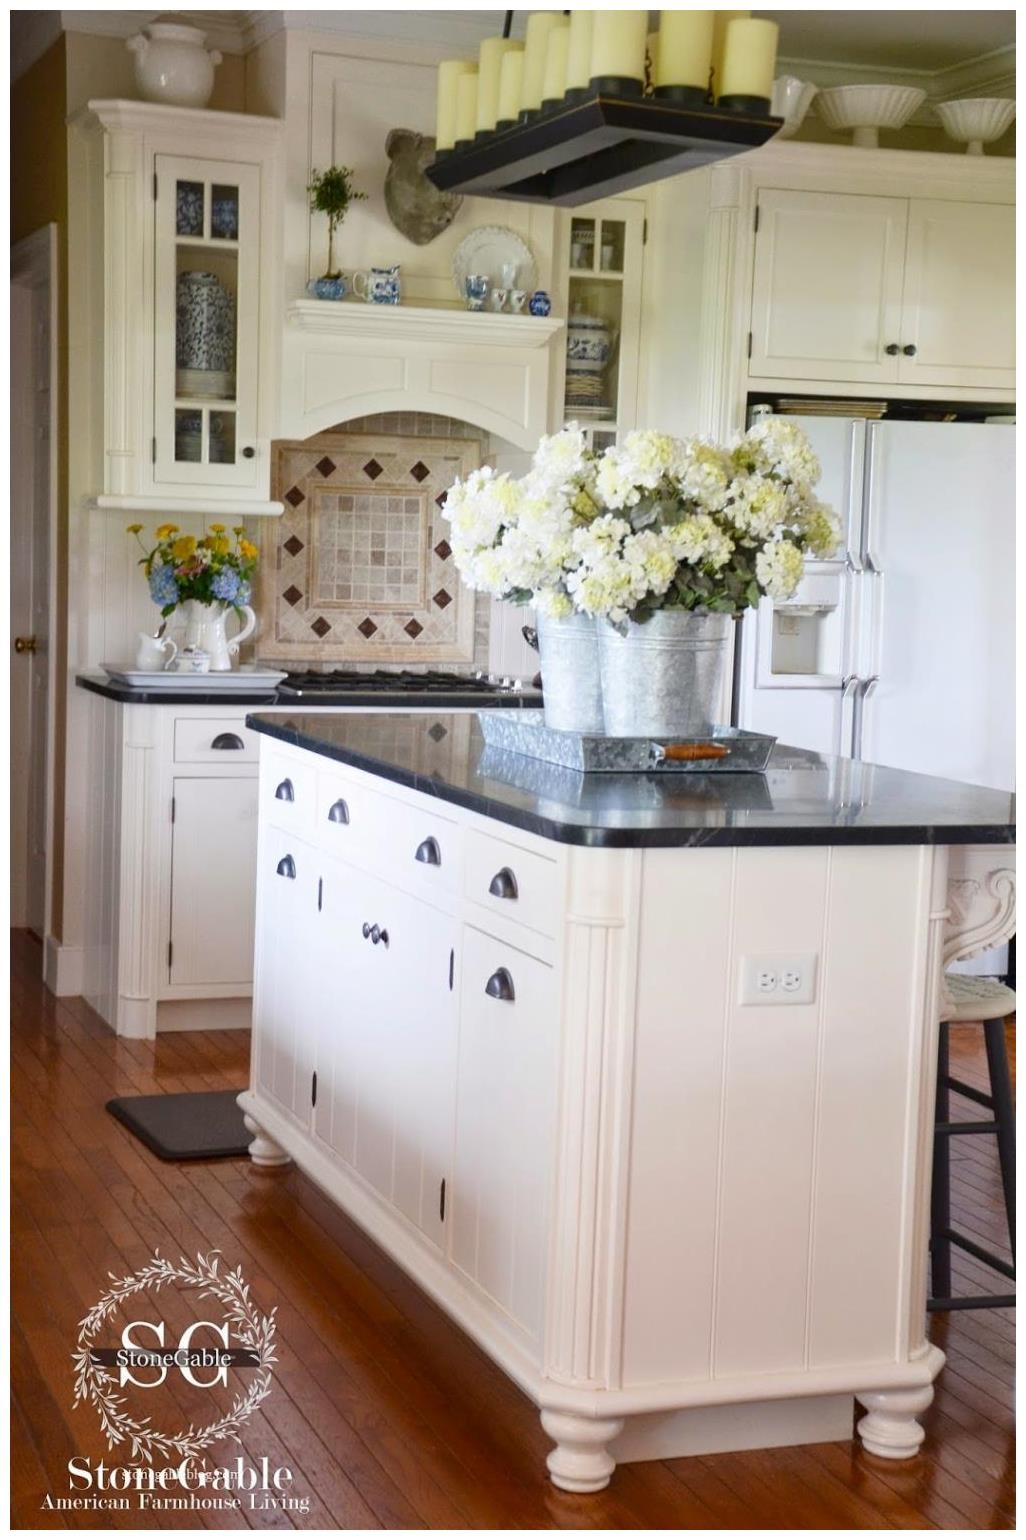 15 What Is A Gable In Kitchen Cabinets  ELEMENTS OF A FARMHOUSE KITCHEN What,Is,Gable,In,Kitchen,Cabinets